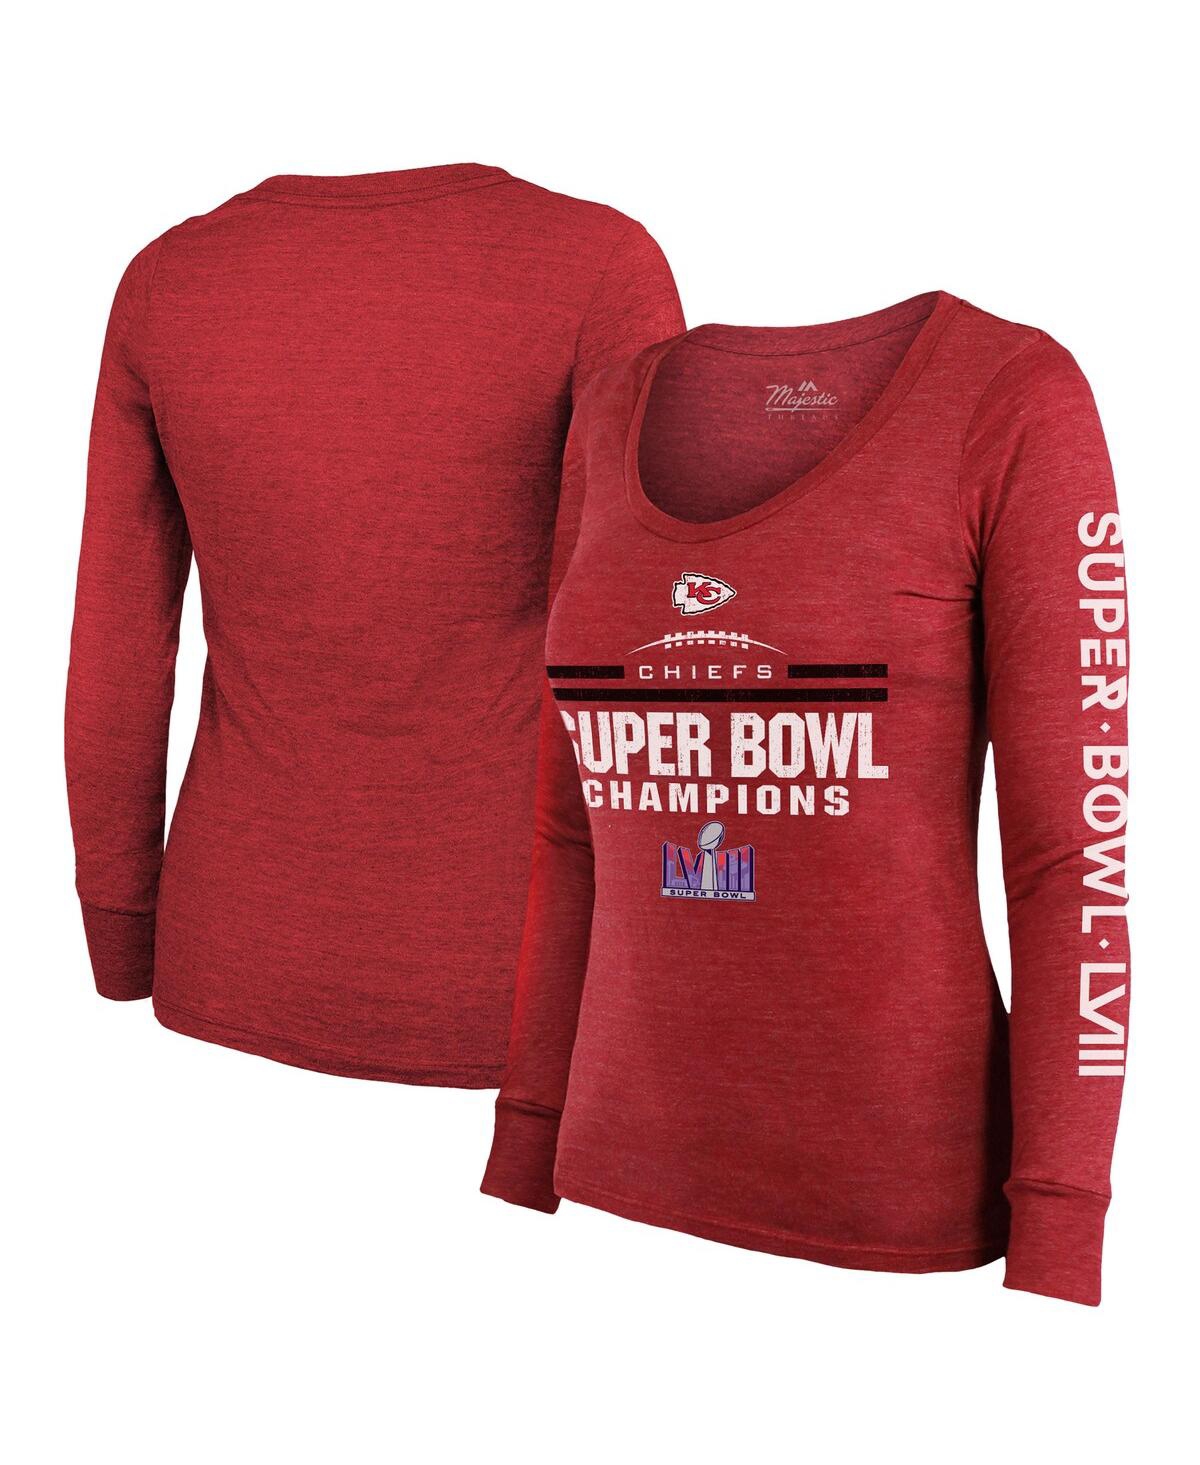 Women's Majestic Red Kansas City Chiefs Super Bowl Lviii Champions Goal Line Stand Scoop Neck Tri-Blend Long Sleeve T-shirt - Red